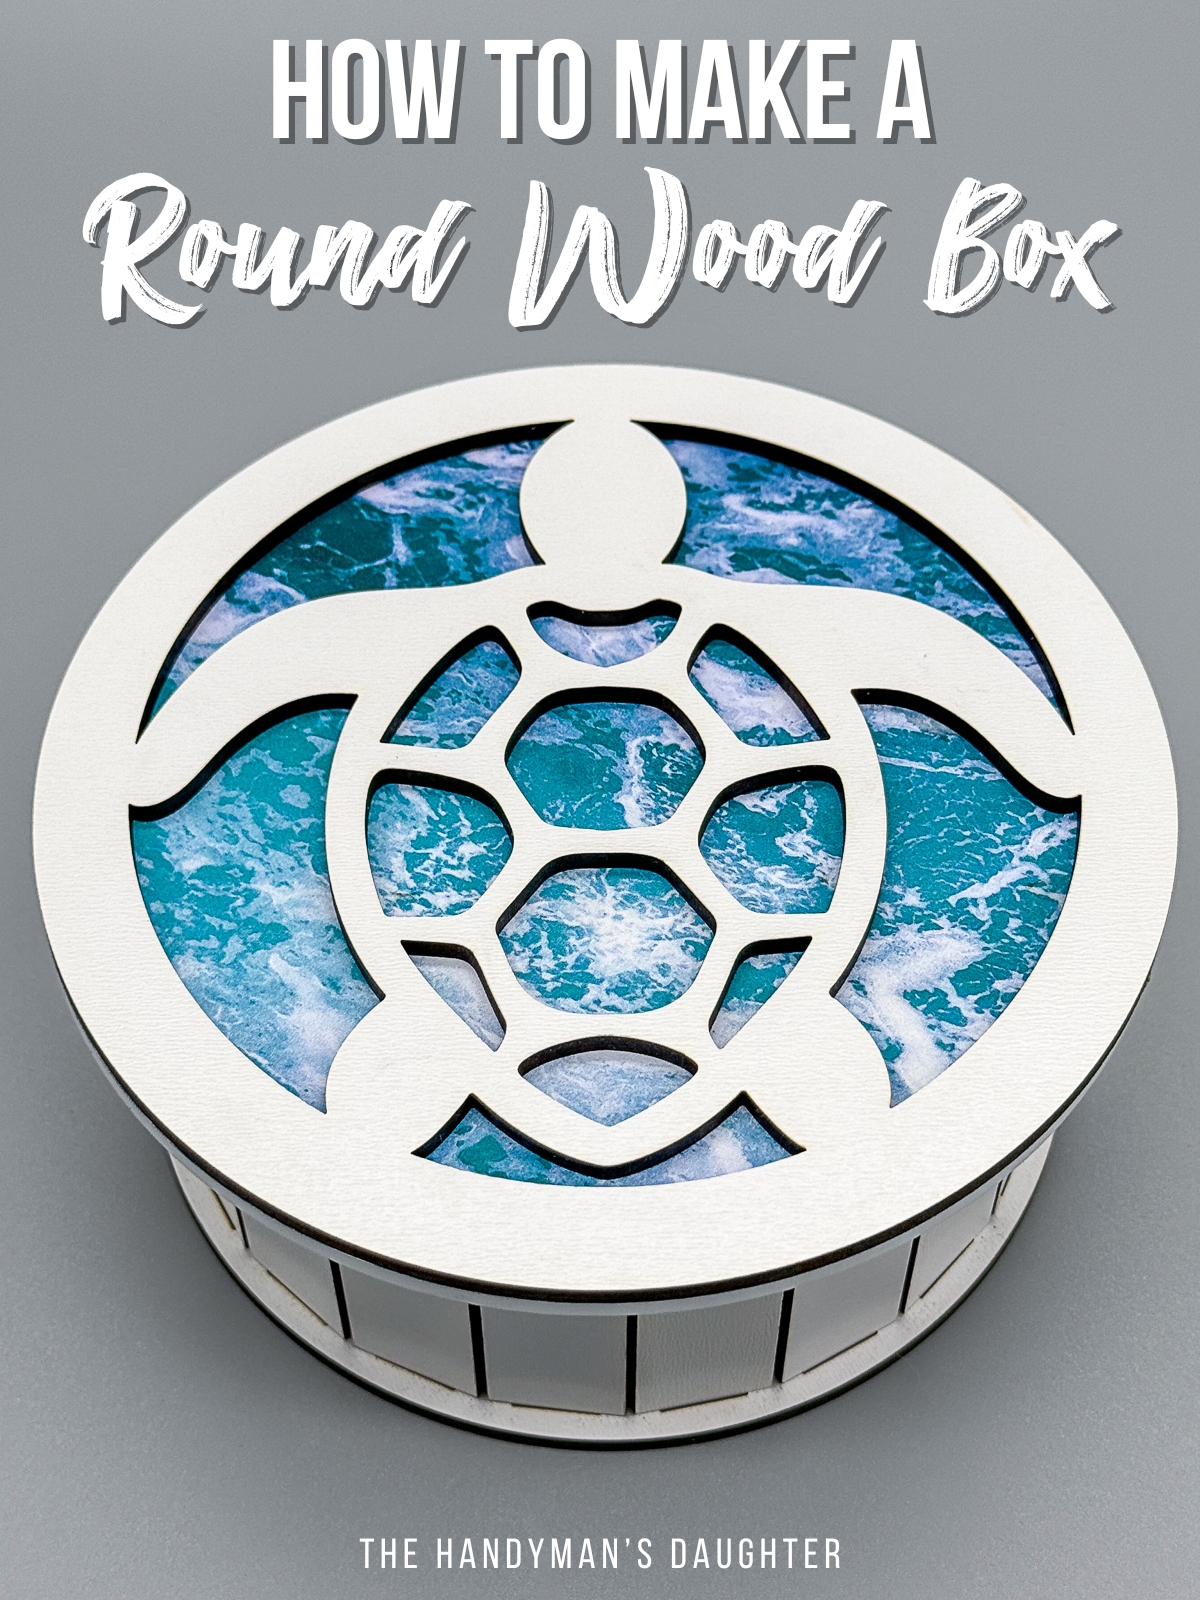 How to Make a Round Wood Box